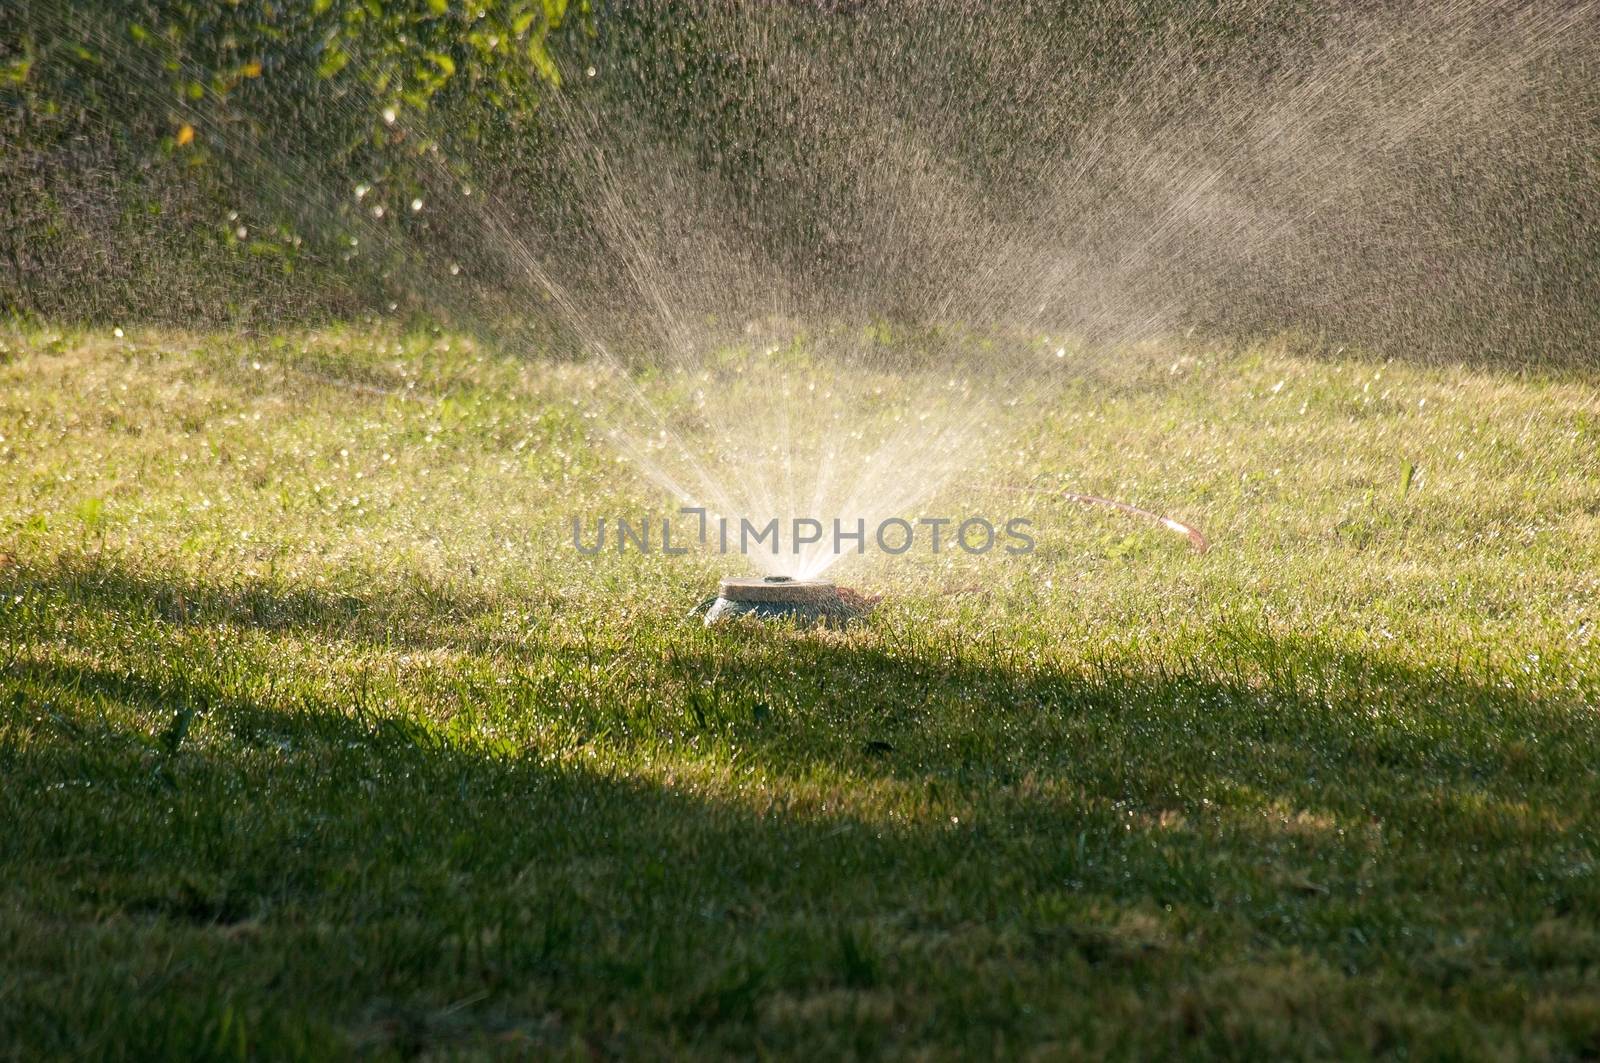 Sprinkler of automatic watering on a green grass.